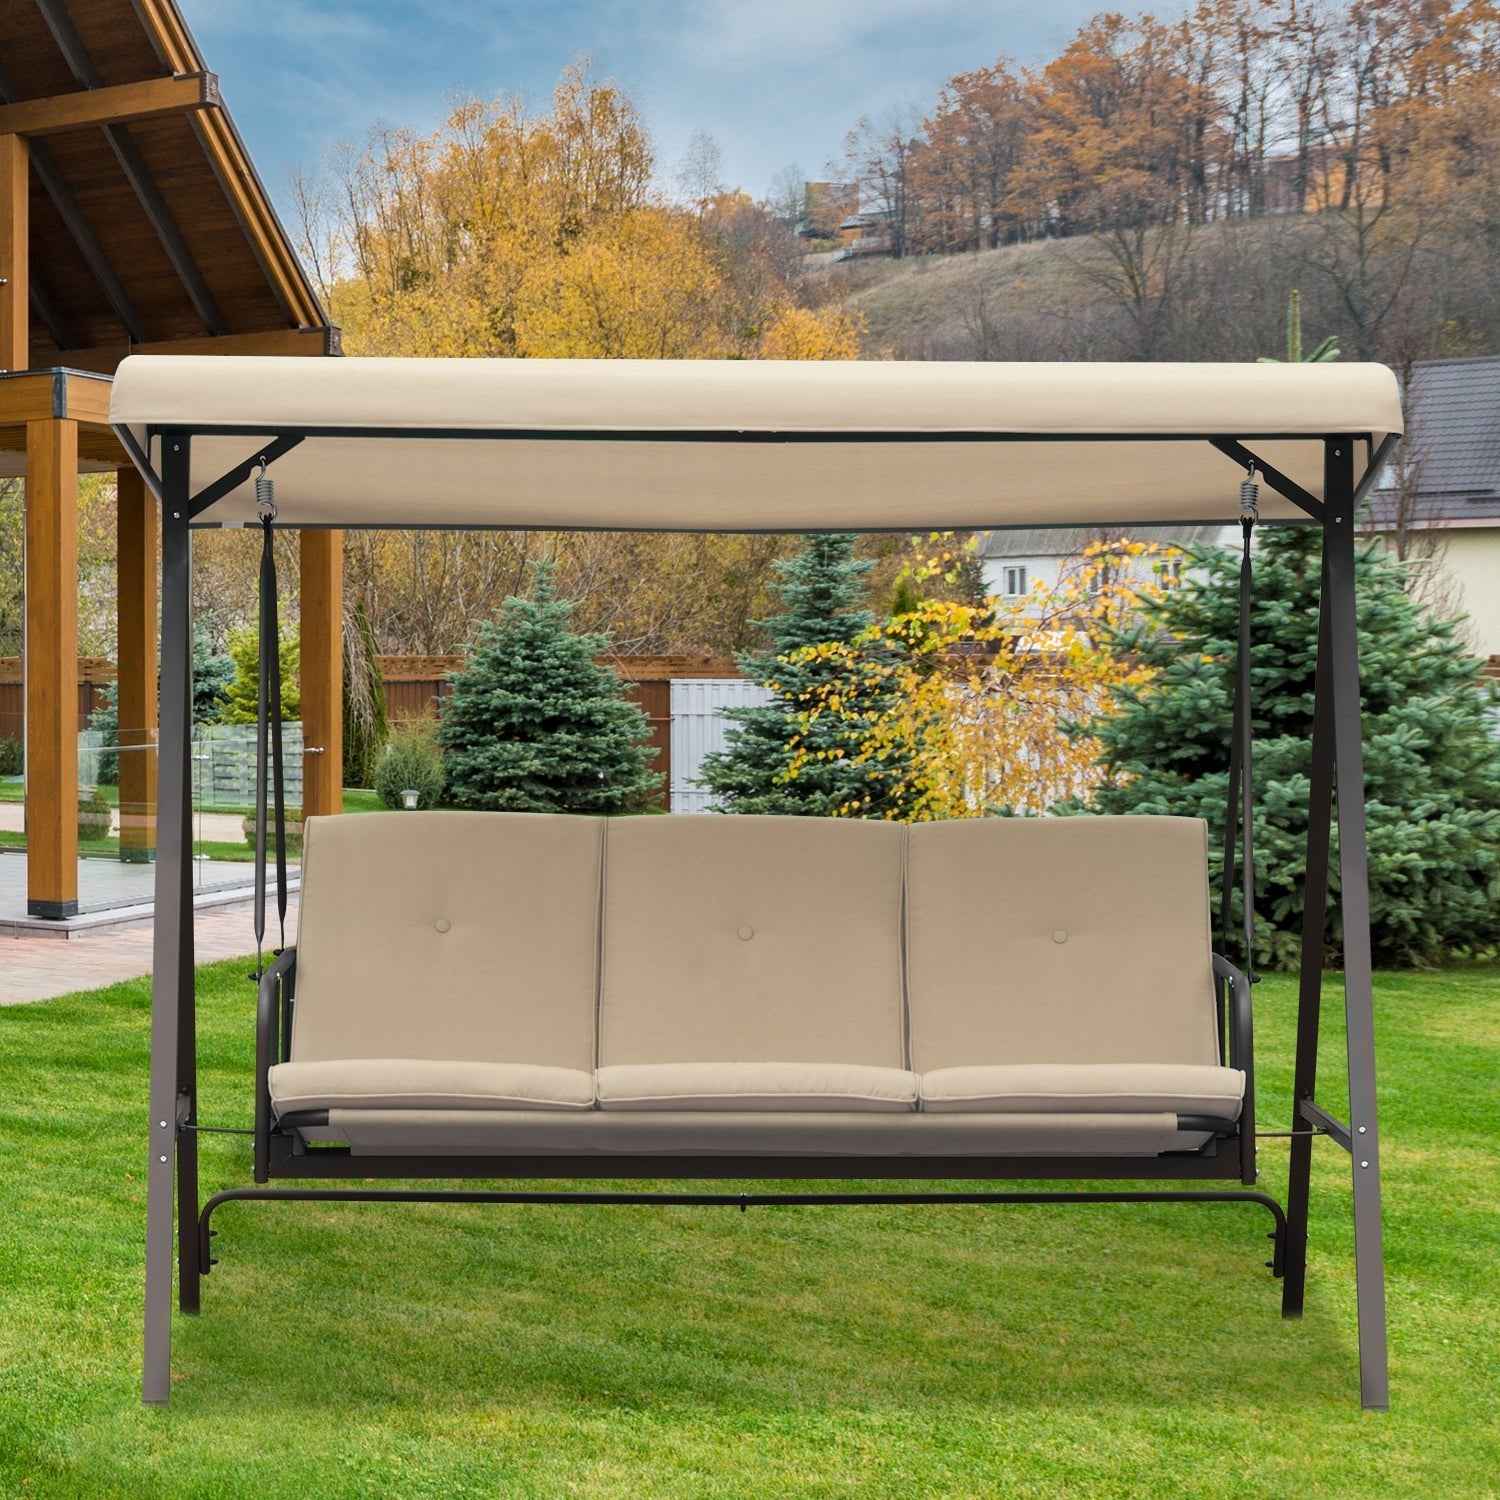 3-Person Outdoor Patio Swing Chair with Adjustable Canopy Furniture Aoodor   